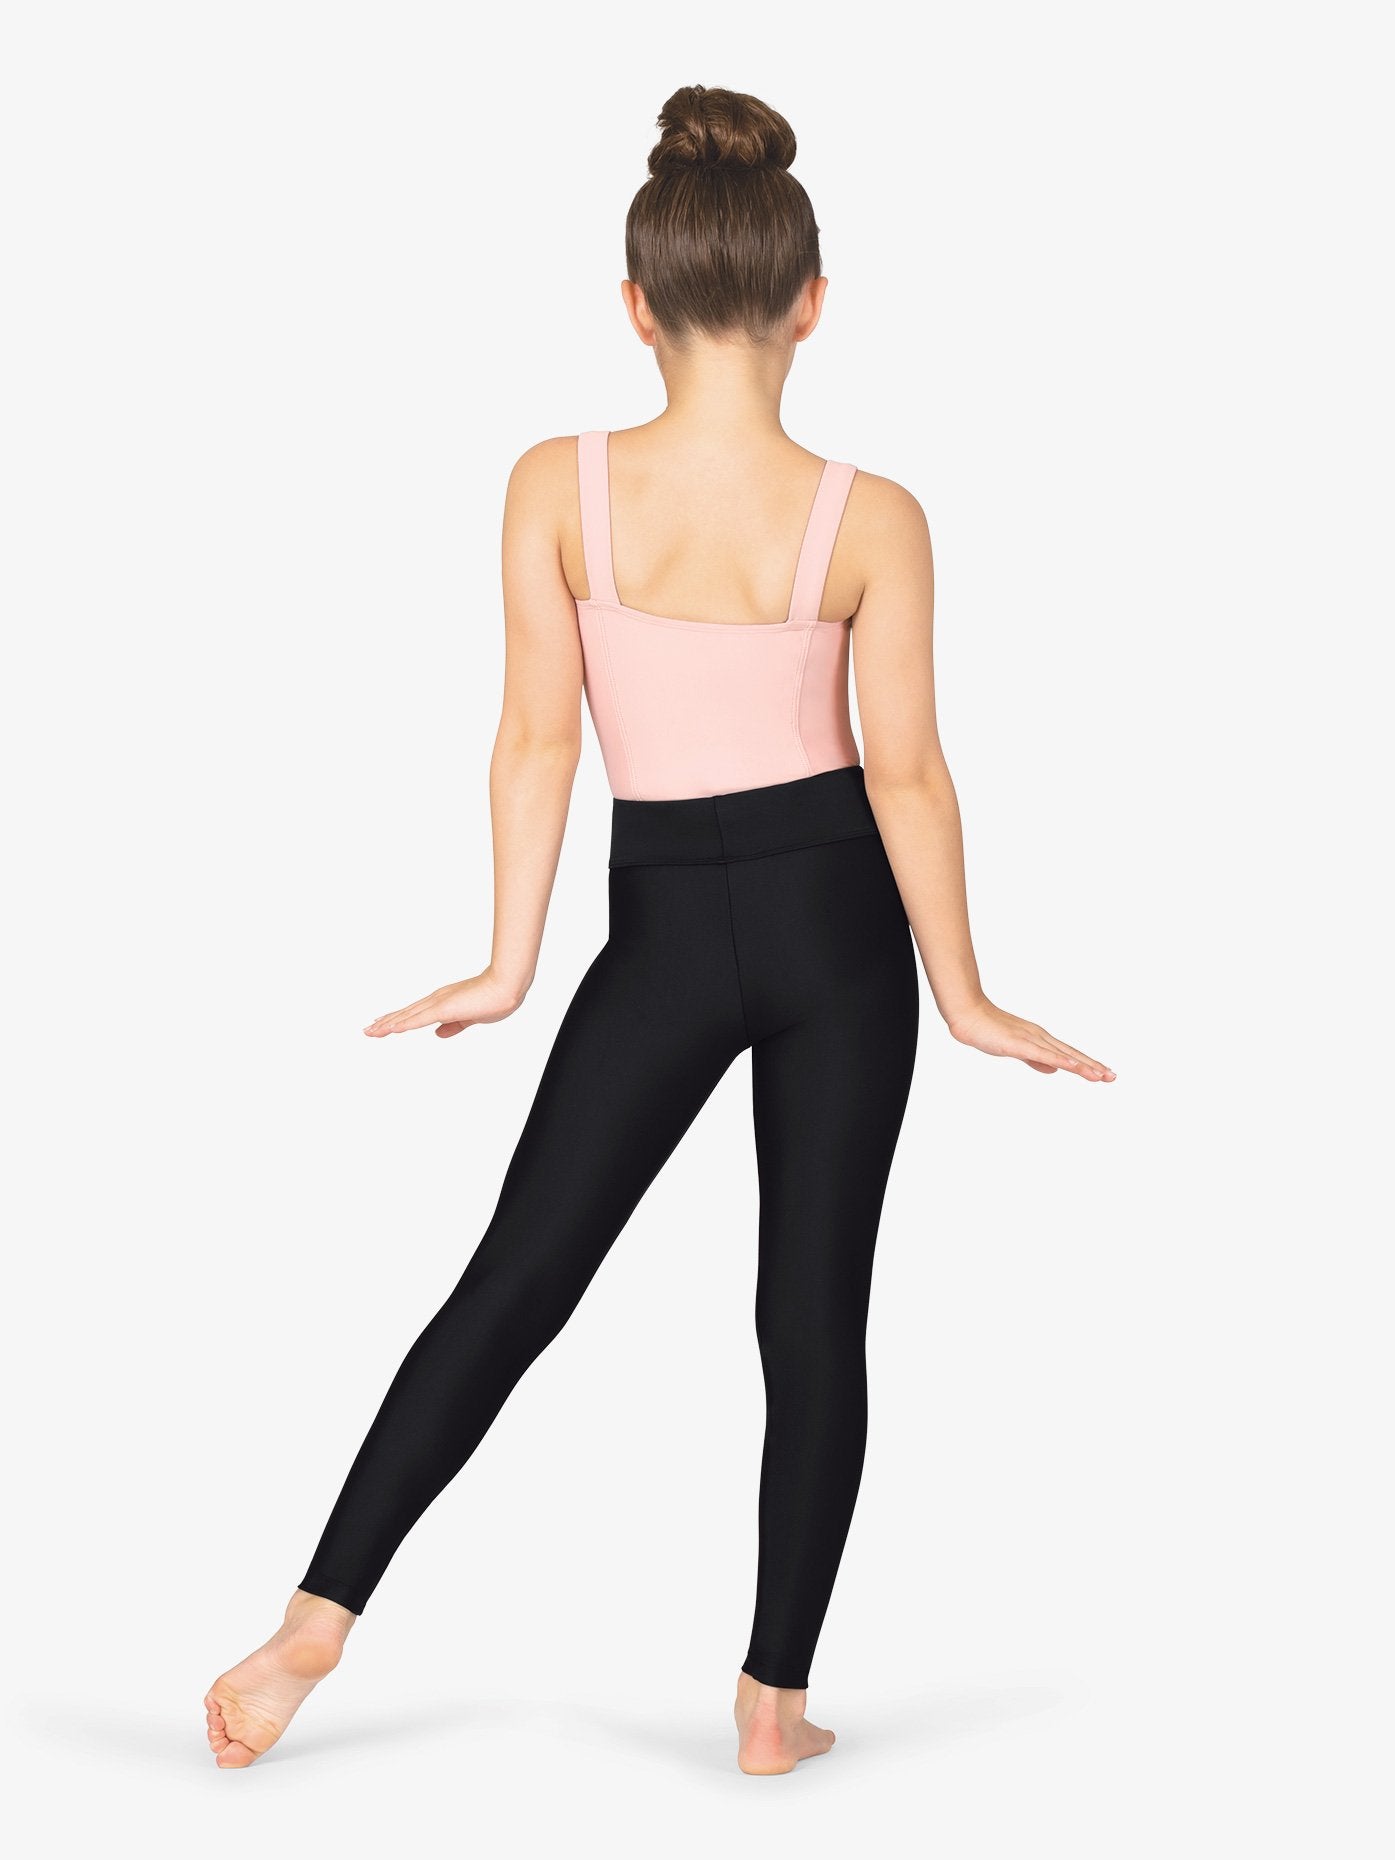 Girl's butter soft black leggings offering comfort and style